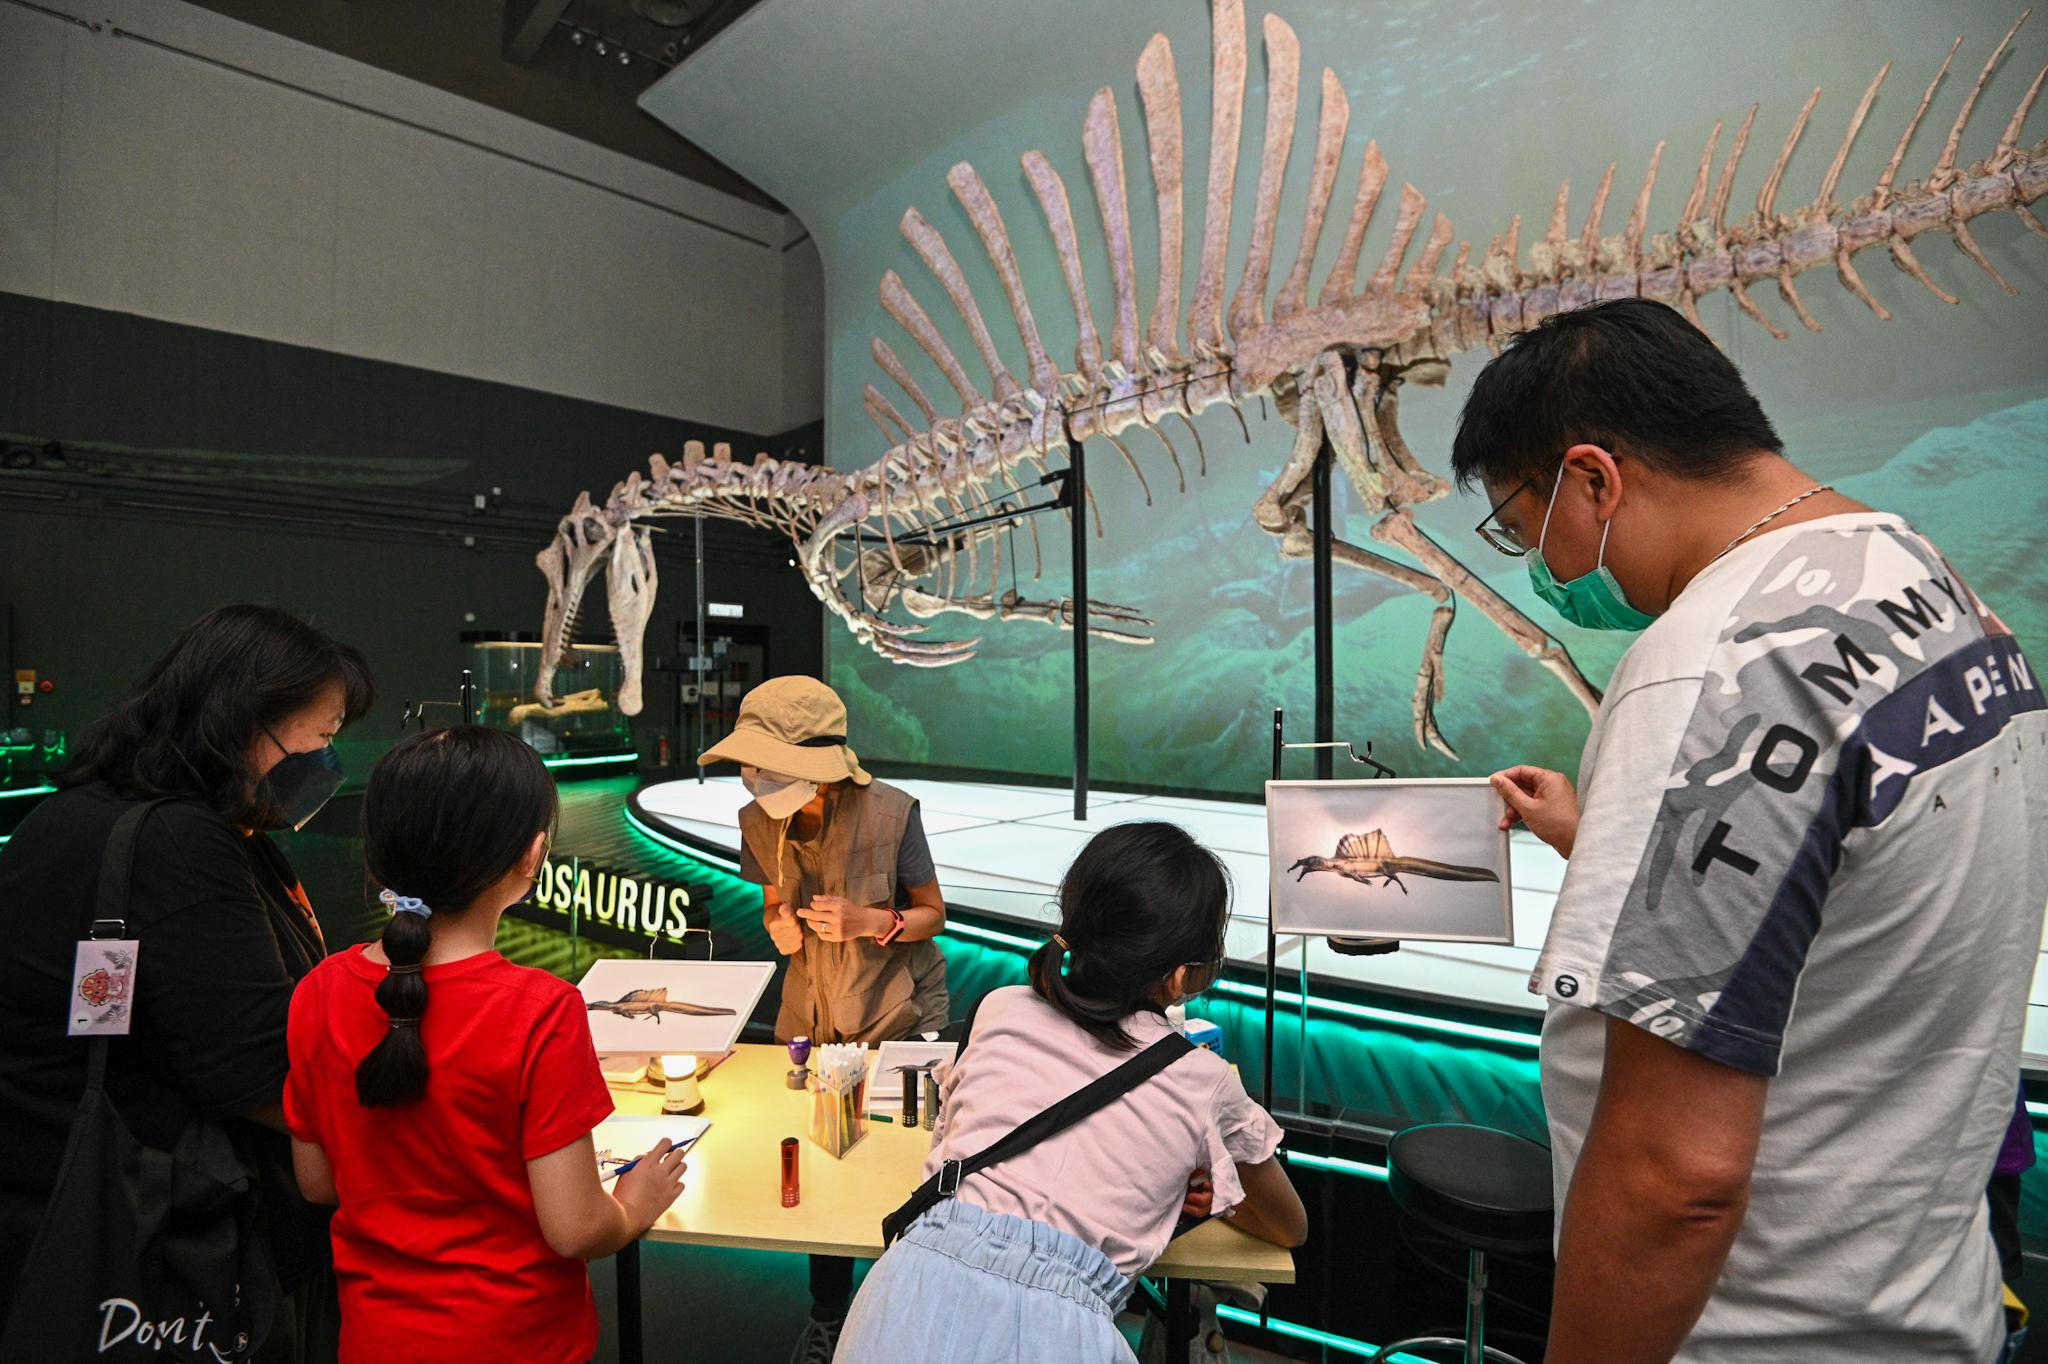 The Hong Kong Science Museum held the first session of "A Night with Dinosaurs" sleepover programme last night (August 5). Participants learnt more about Spinosaurus in an activity at the gallery.